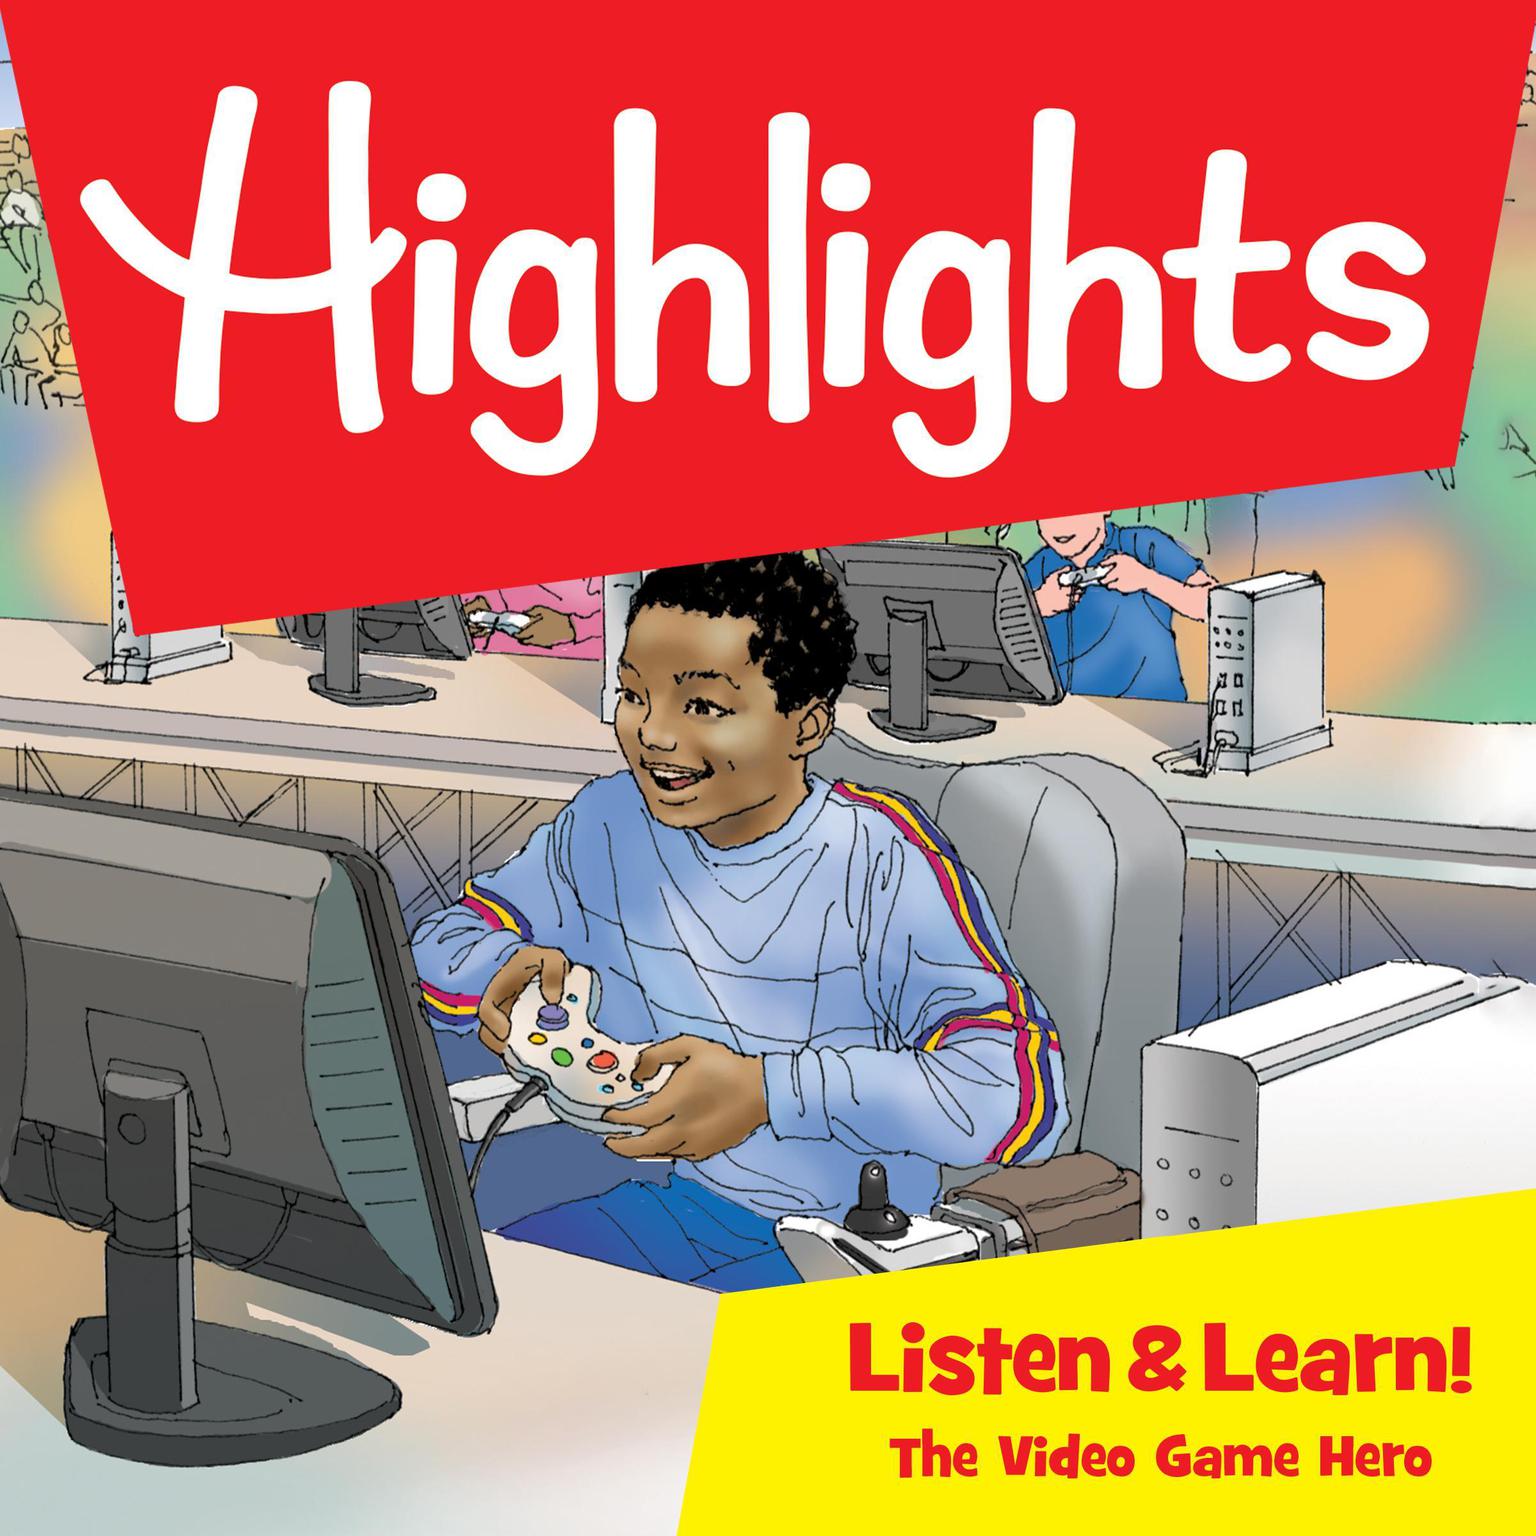 Highlights Listen & Learn!: The Video Game Hero: An Immersive Audio Study for Grade 5 Audiobook, by Highlights for Children